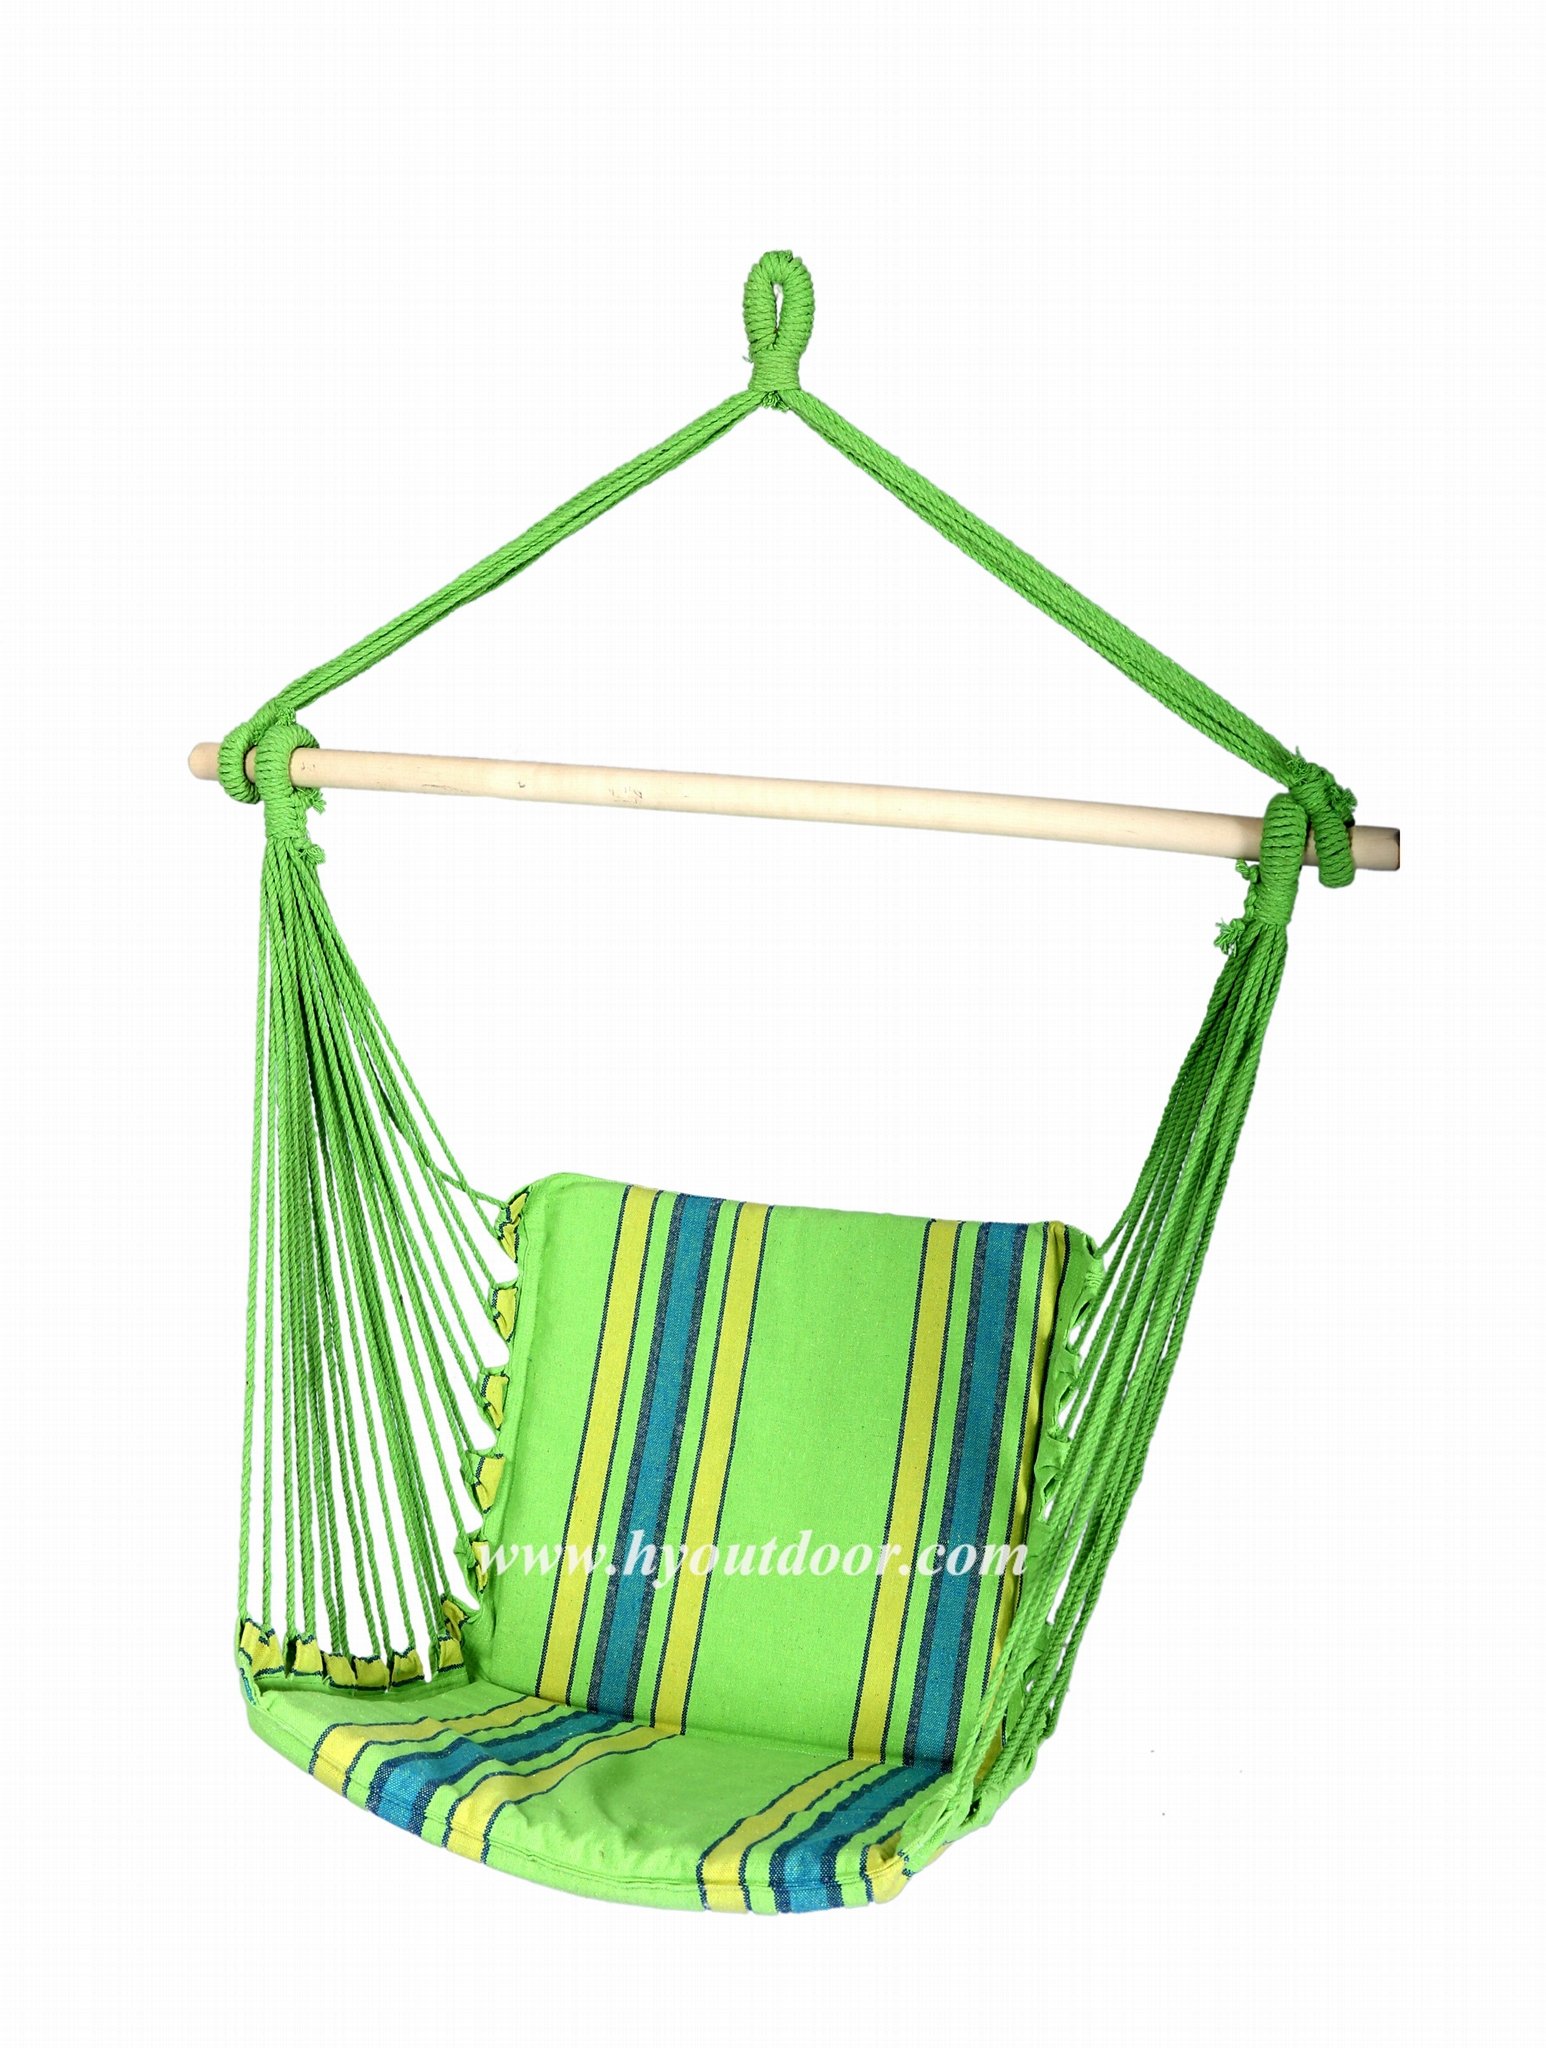 Hanging chair without armrest 3